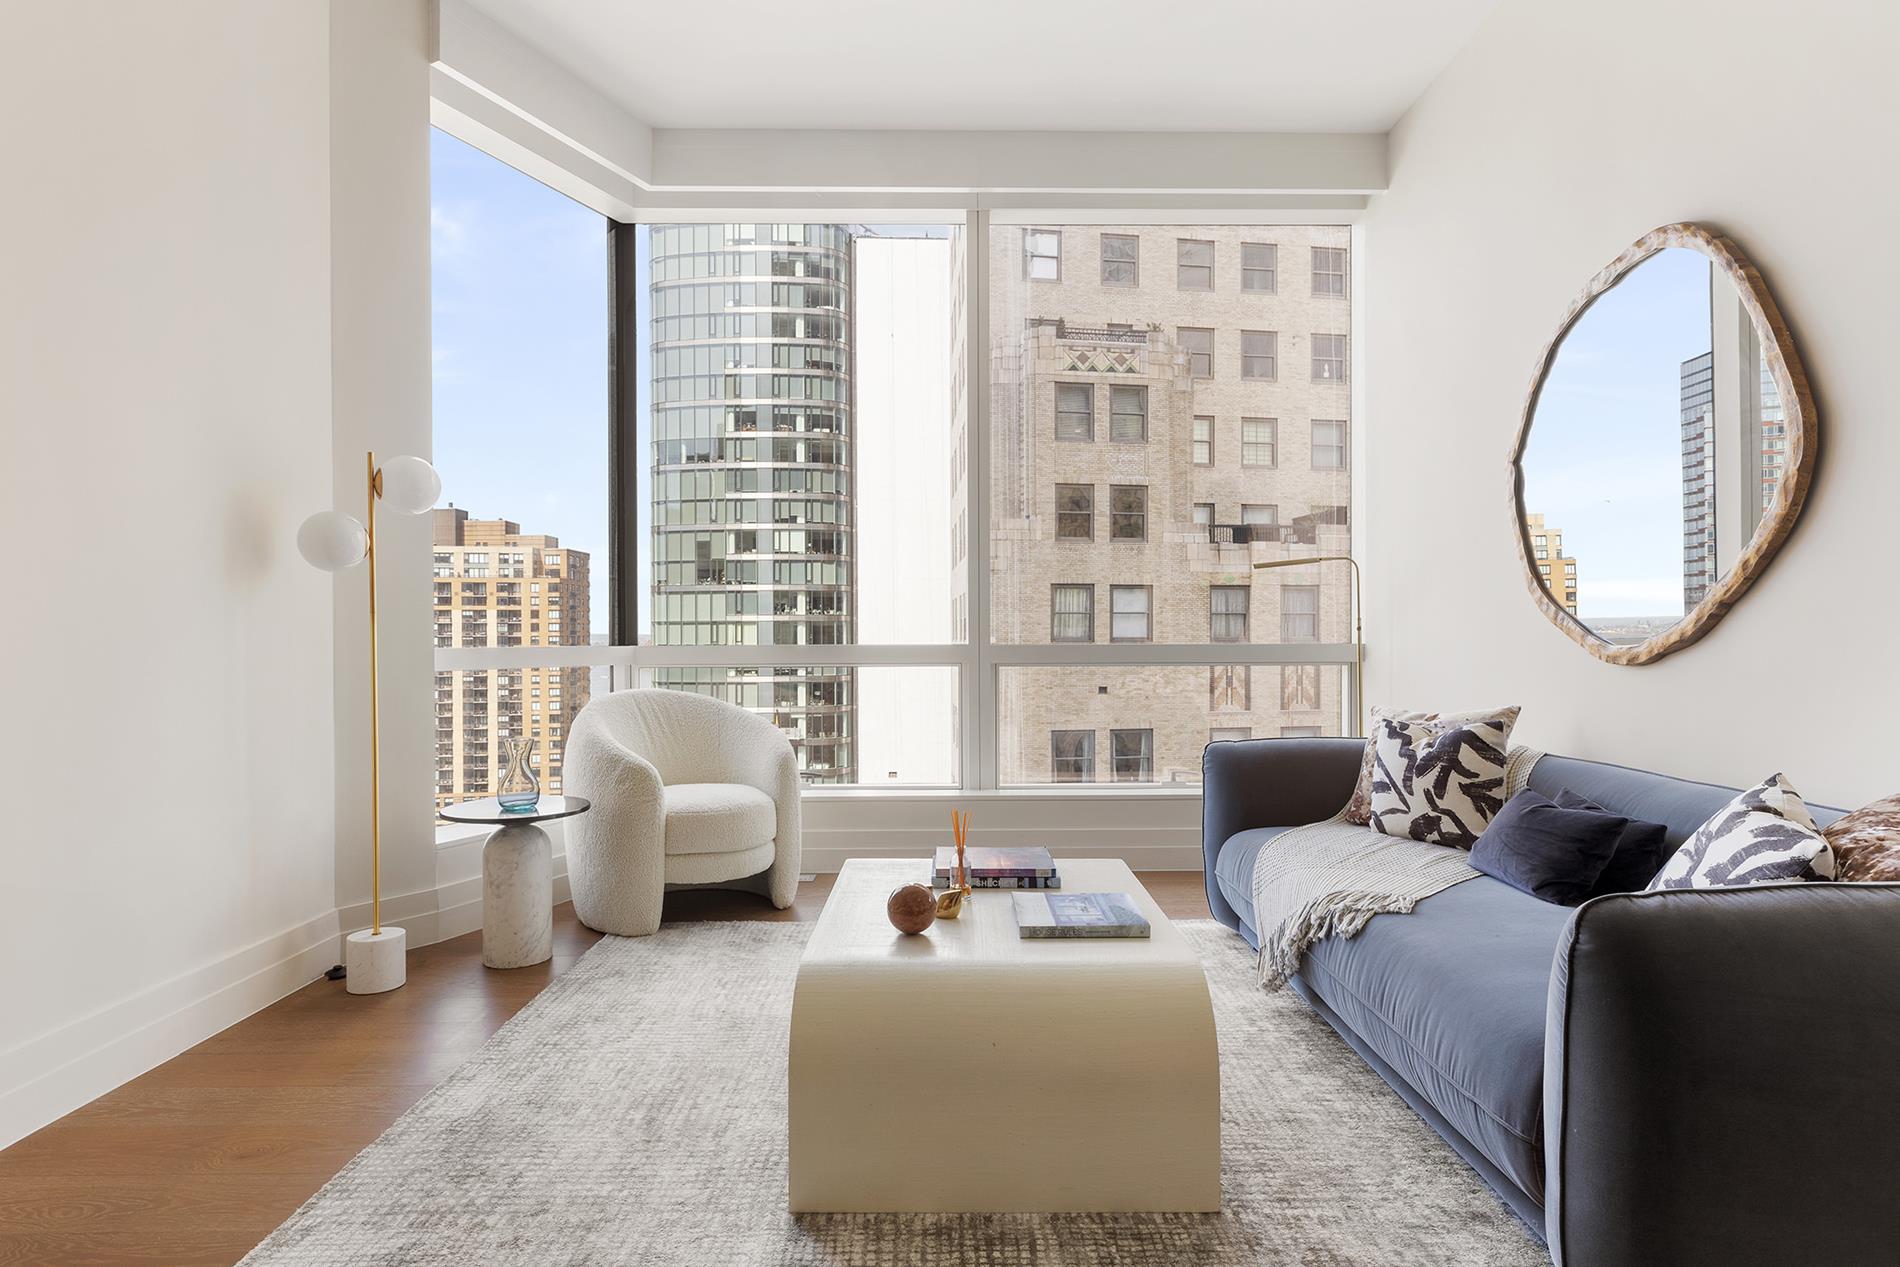 77 Greenwich Street 20-C, Financial District, Downtown, NYC - 2 Bedrooms  
2.5 Bathrooms  
4 Rooms - 